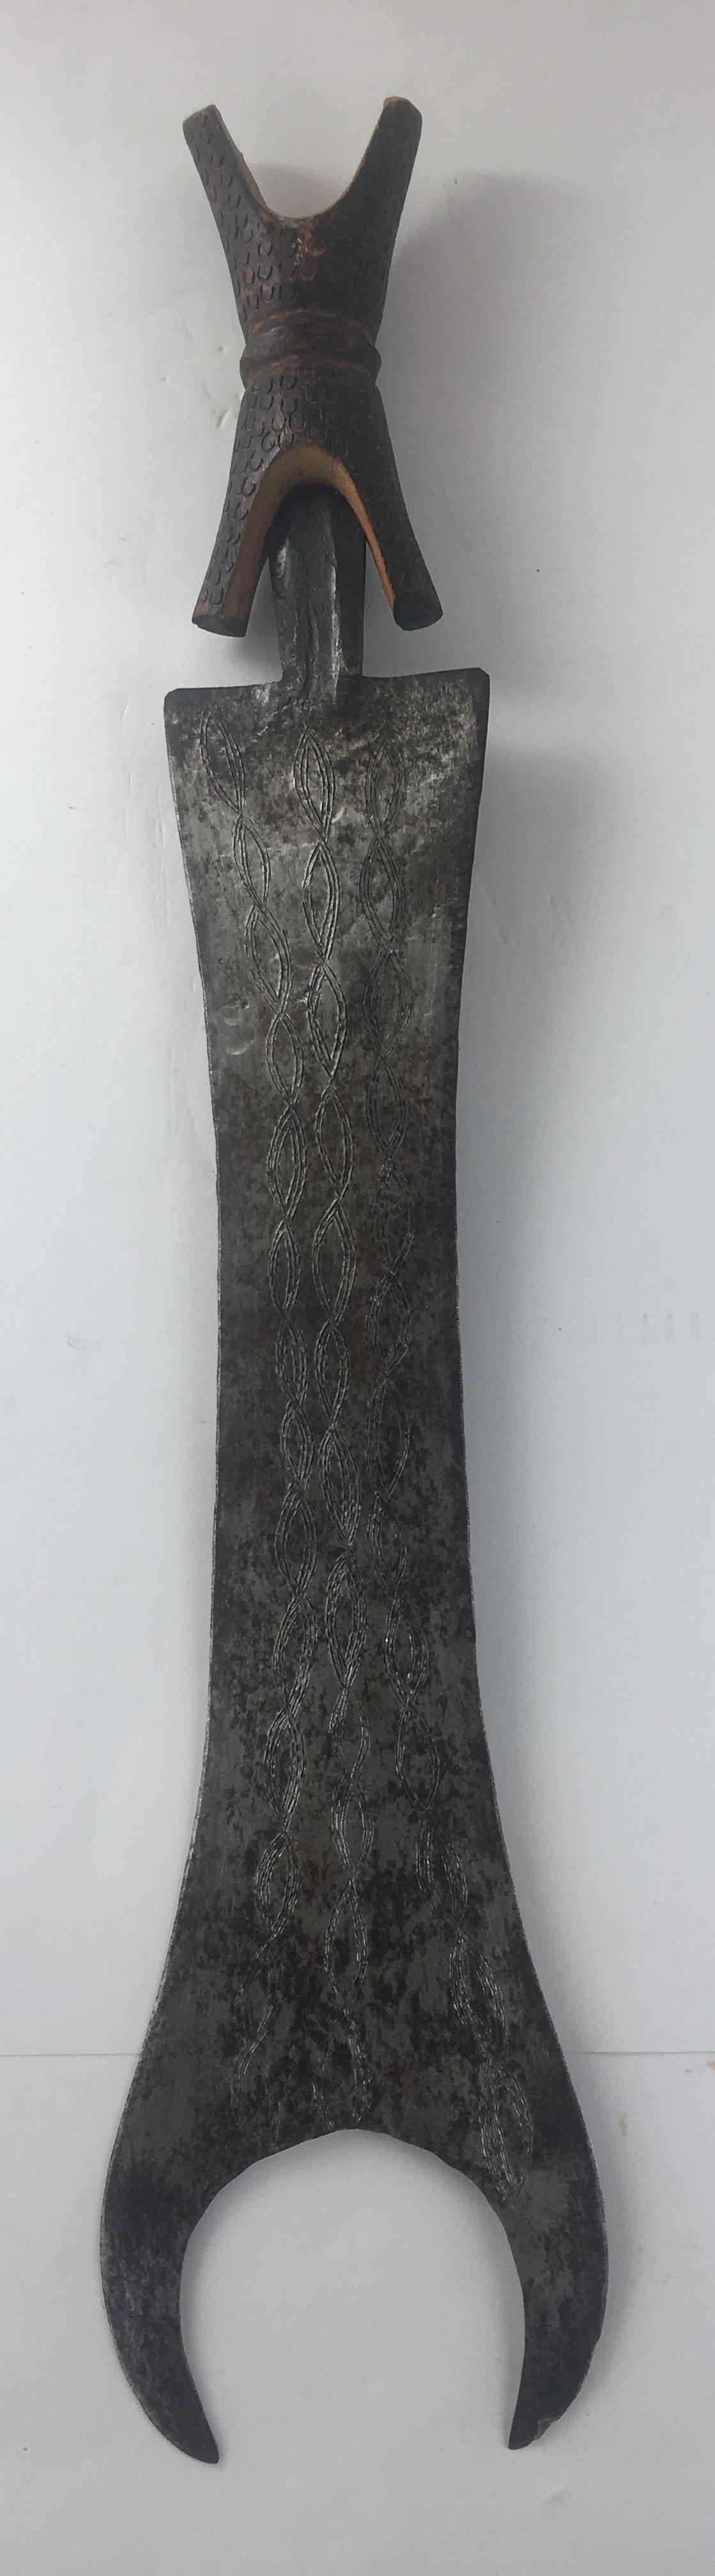 African ceremonial sword from the democratic Republic of Congo, circa 1920s. Iron and wood, in a case made of cloth and animal skin.

This status symbol tribal sword is carried is a single edged, iron blade engraved with elaborate patterns on both